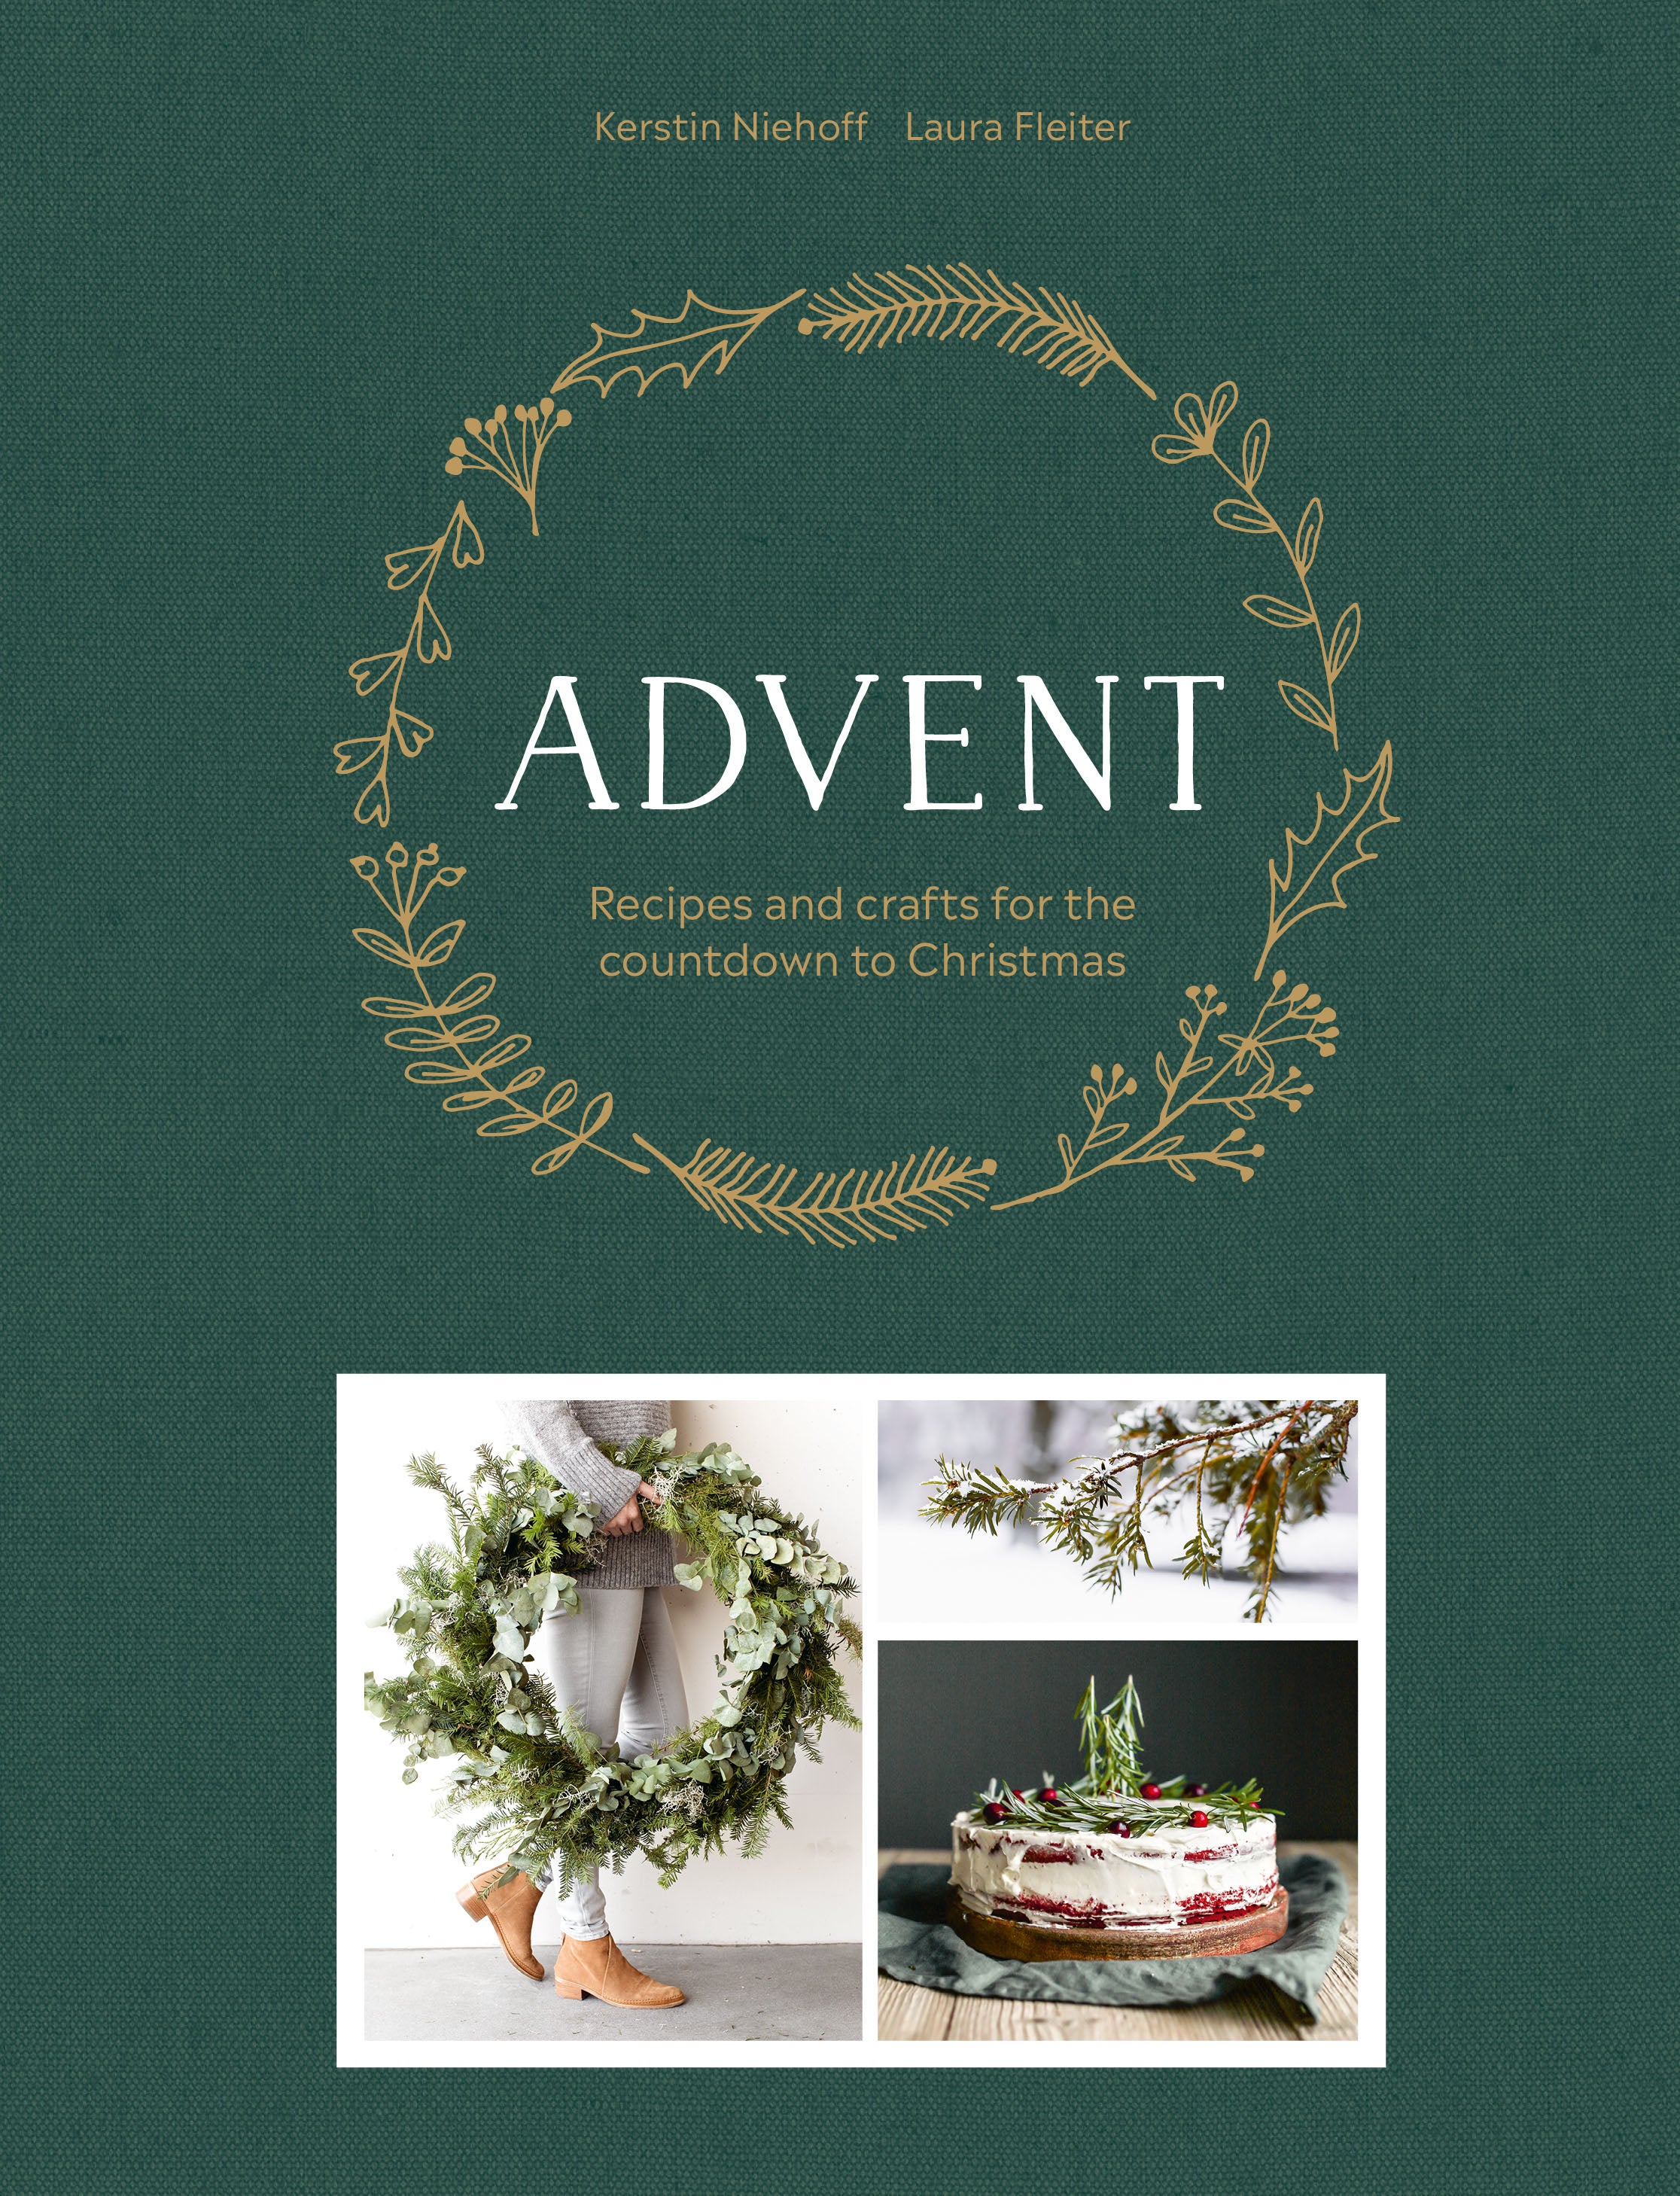 Advent: Recipes and Crafts for the Countdown to Christmas | Book | Fleiter, Laura & Niehoff, Kerstin - Lifestory - Bookspeed